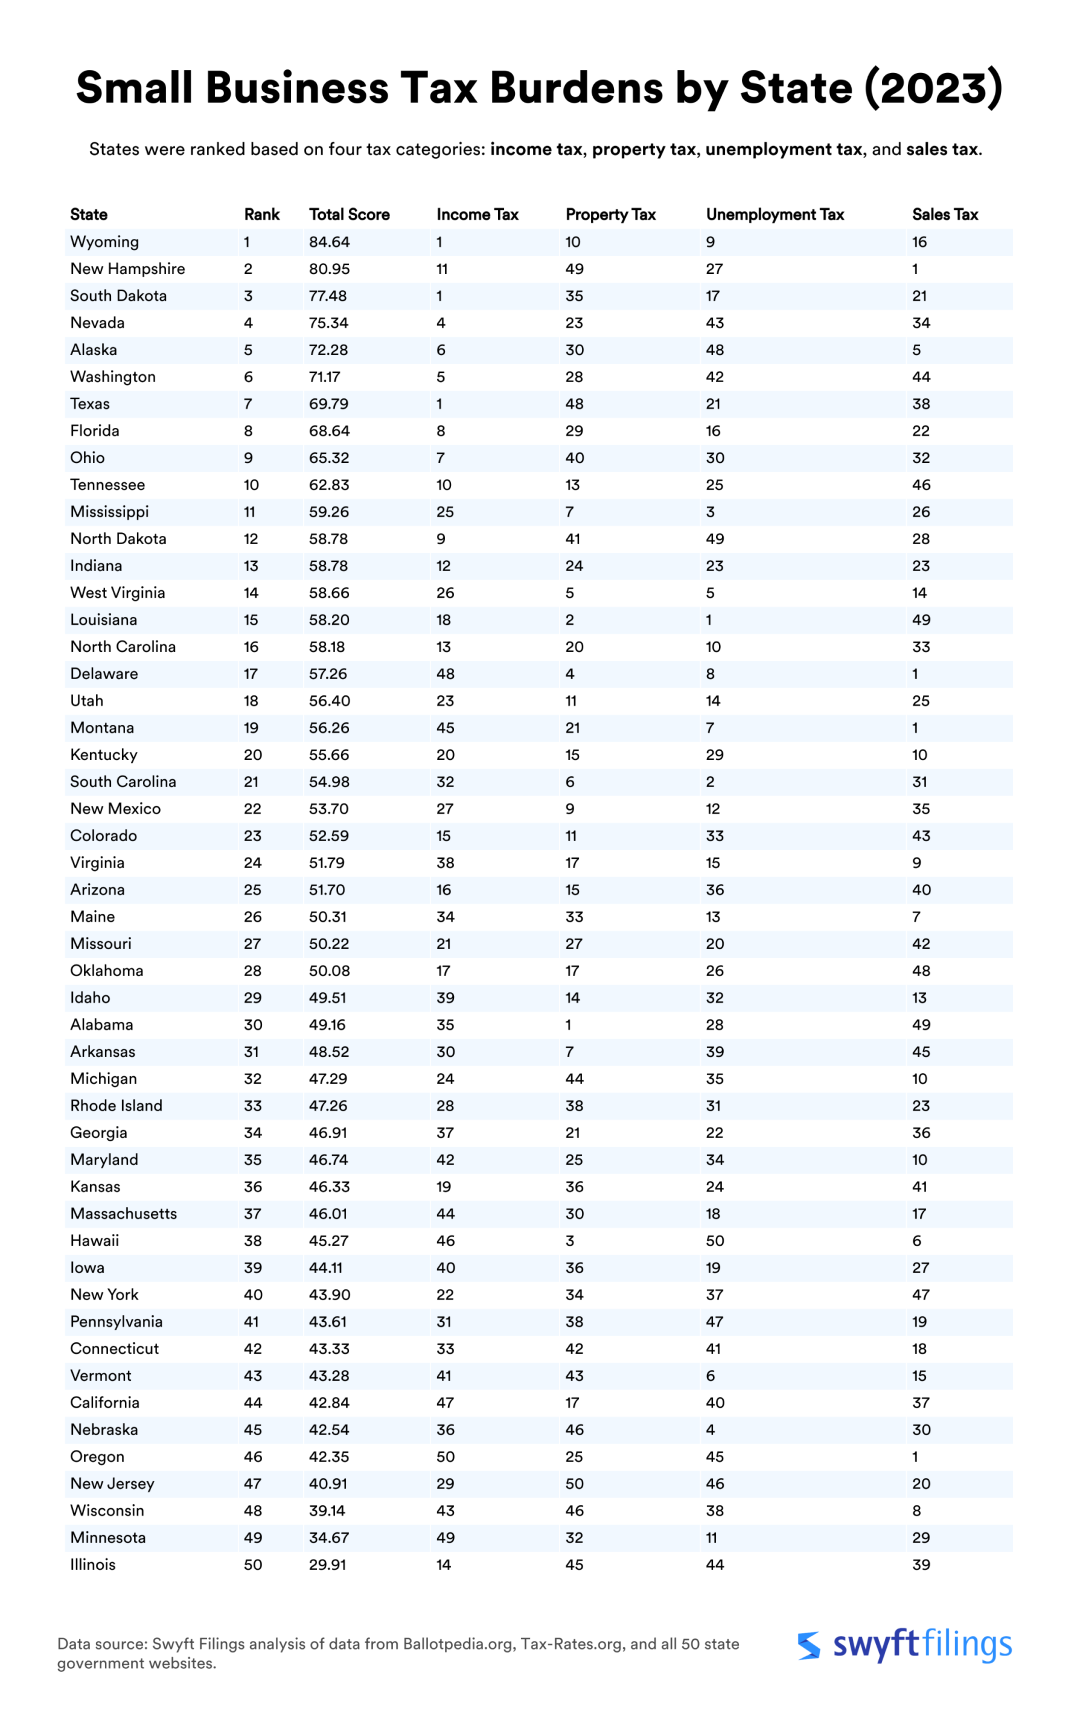 A table listing all 50 states with information on their small business tax burdens.